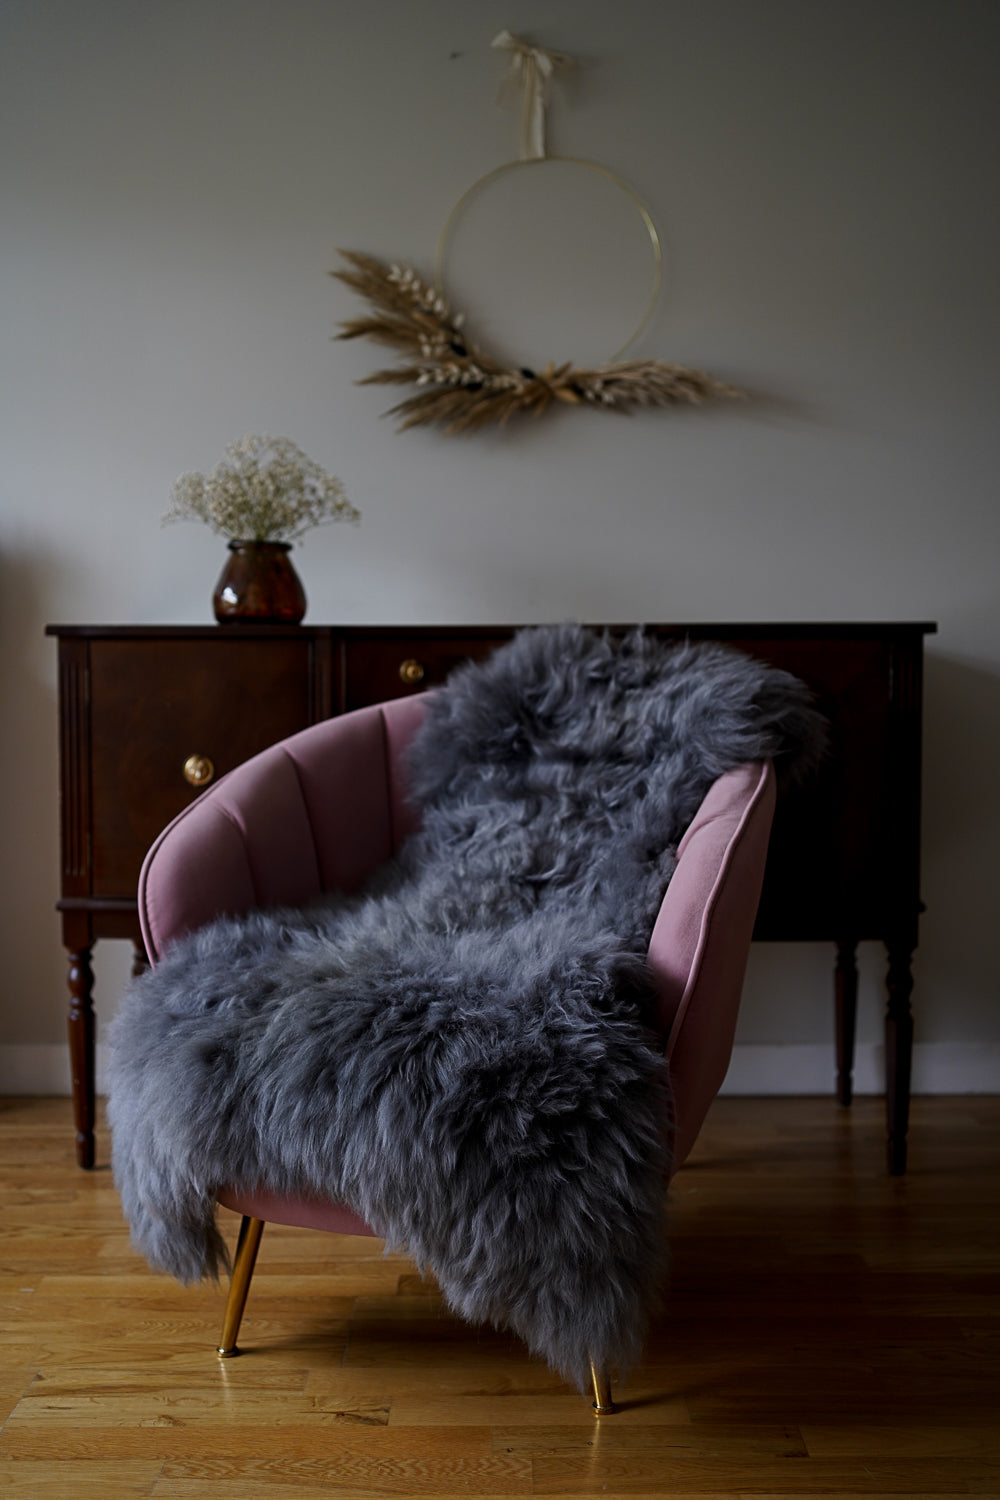 Home decoration, rug, douvet, grey sheepskin rug, very fluffy and soft and warm